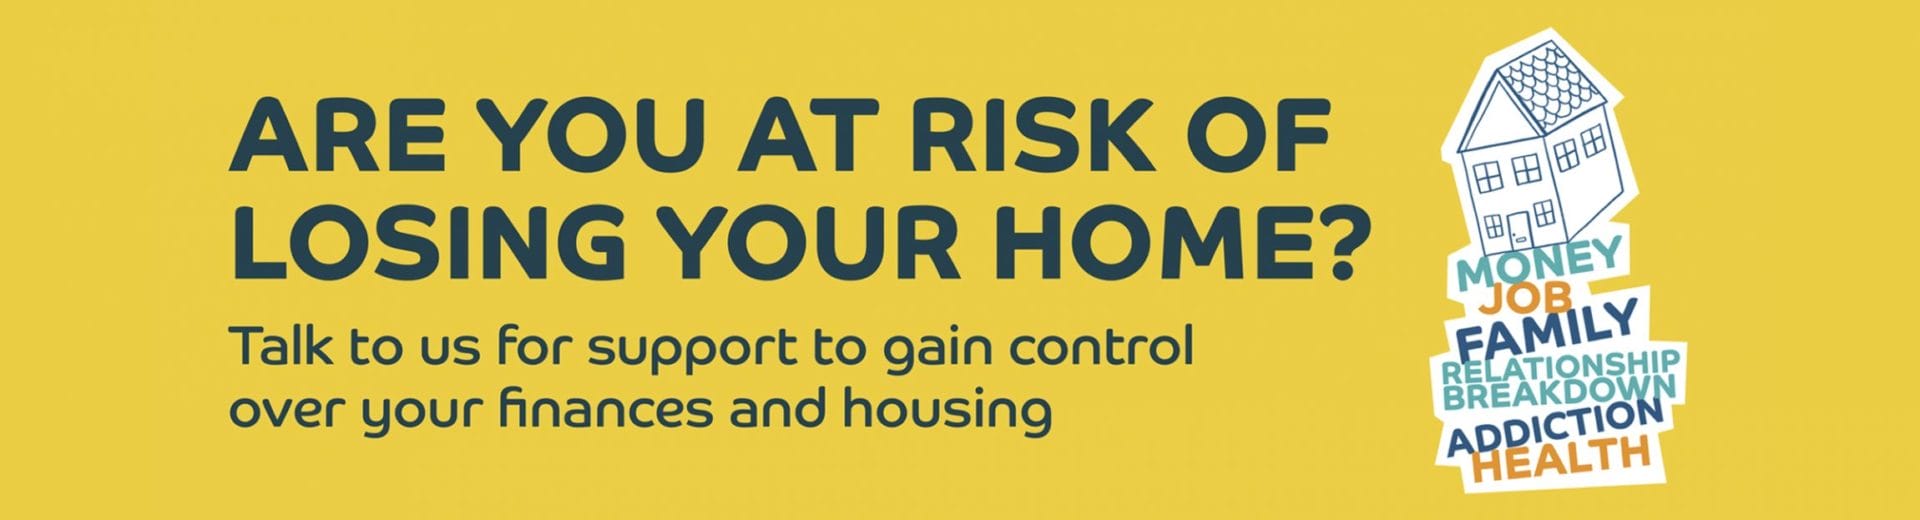 At risk of losing your home?